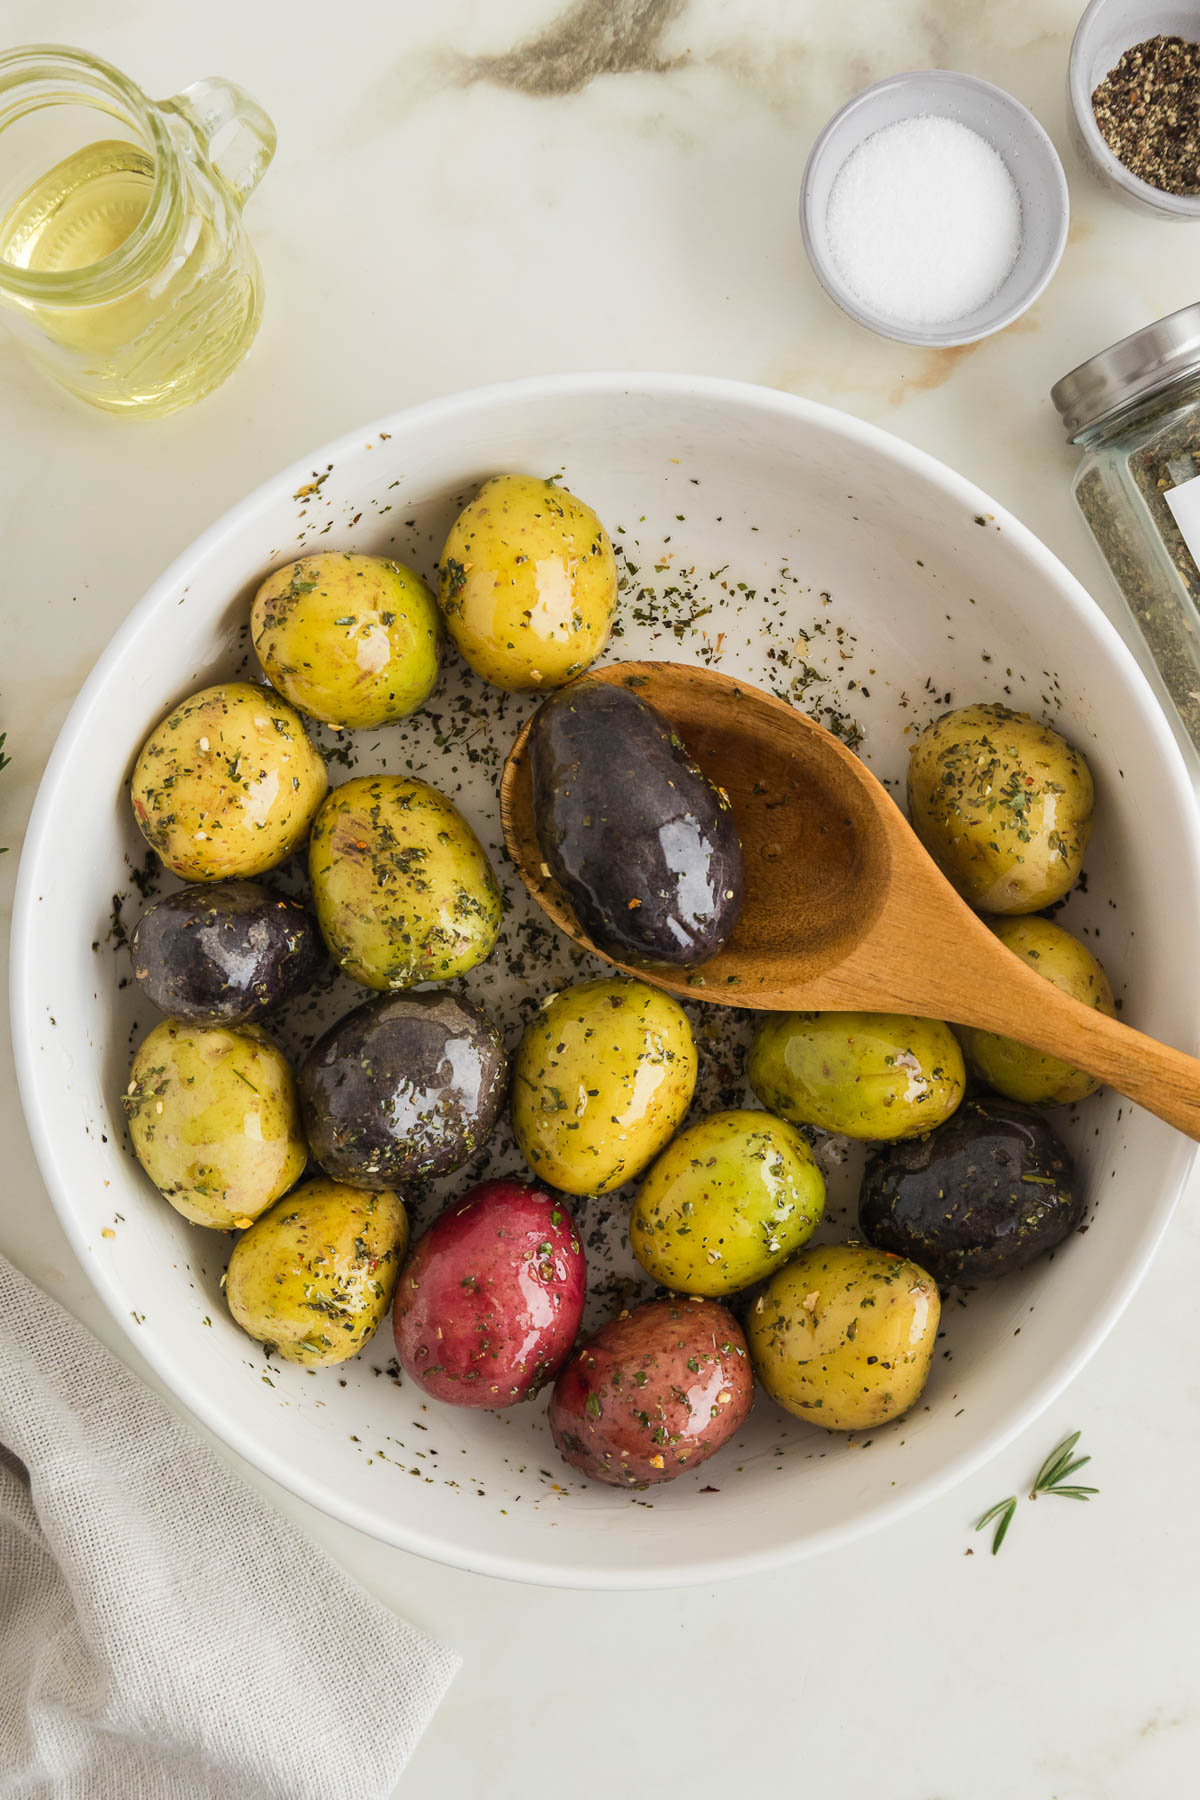 Roasted potatoes with seasoning in a white bowl.